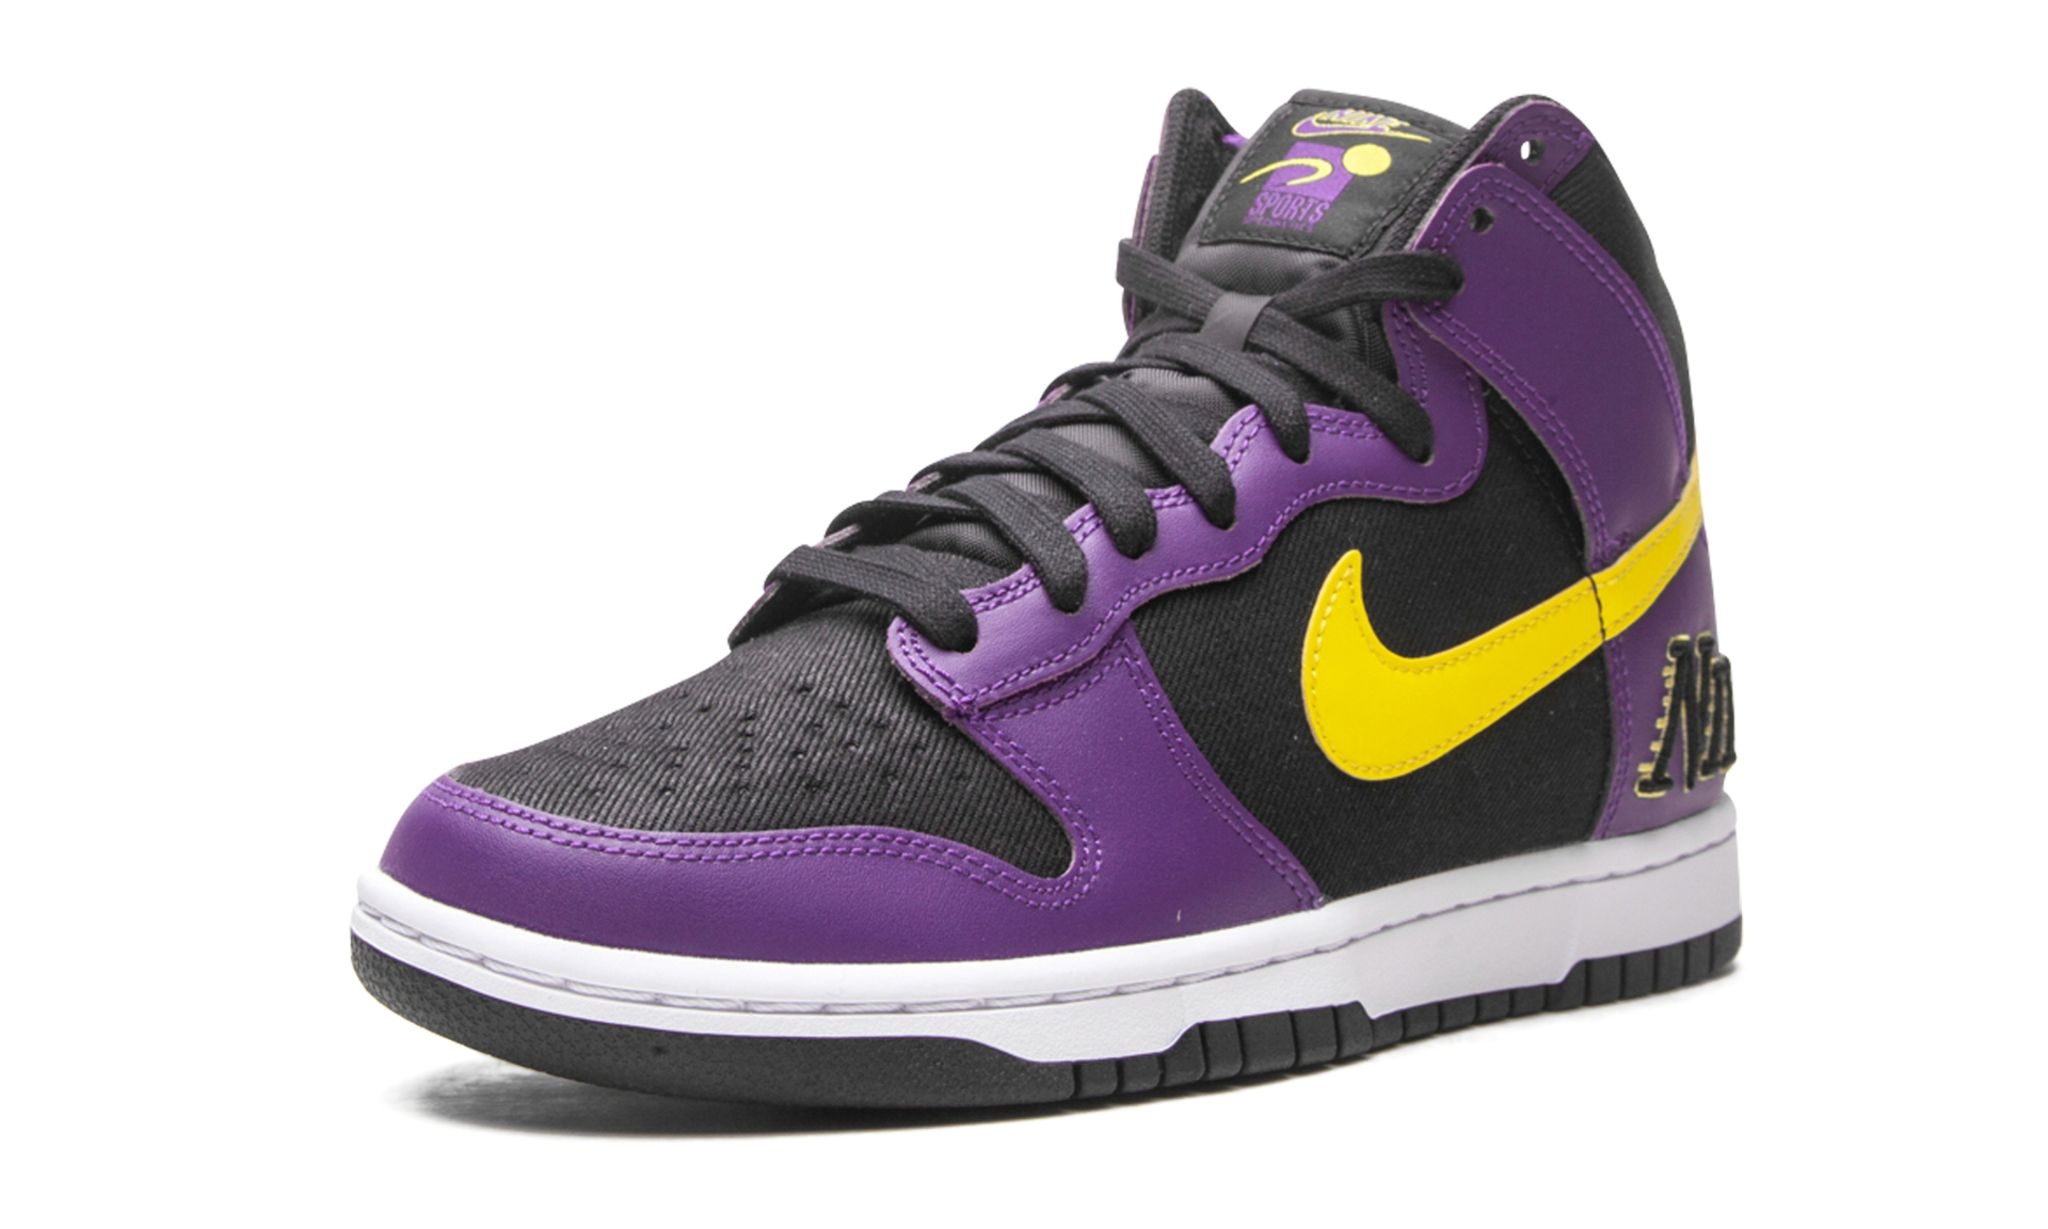 Dunk High "Lakers" - 4